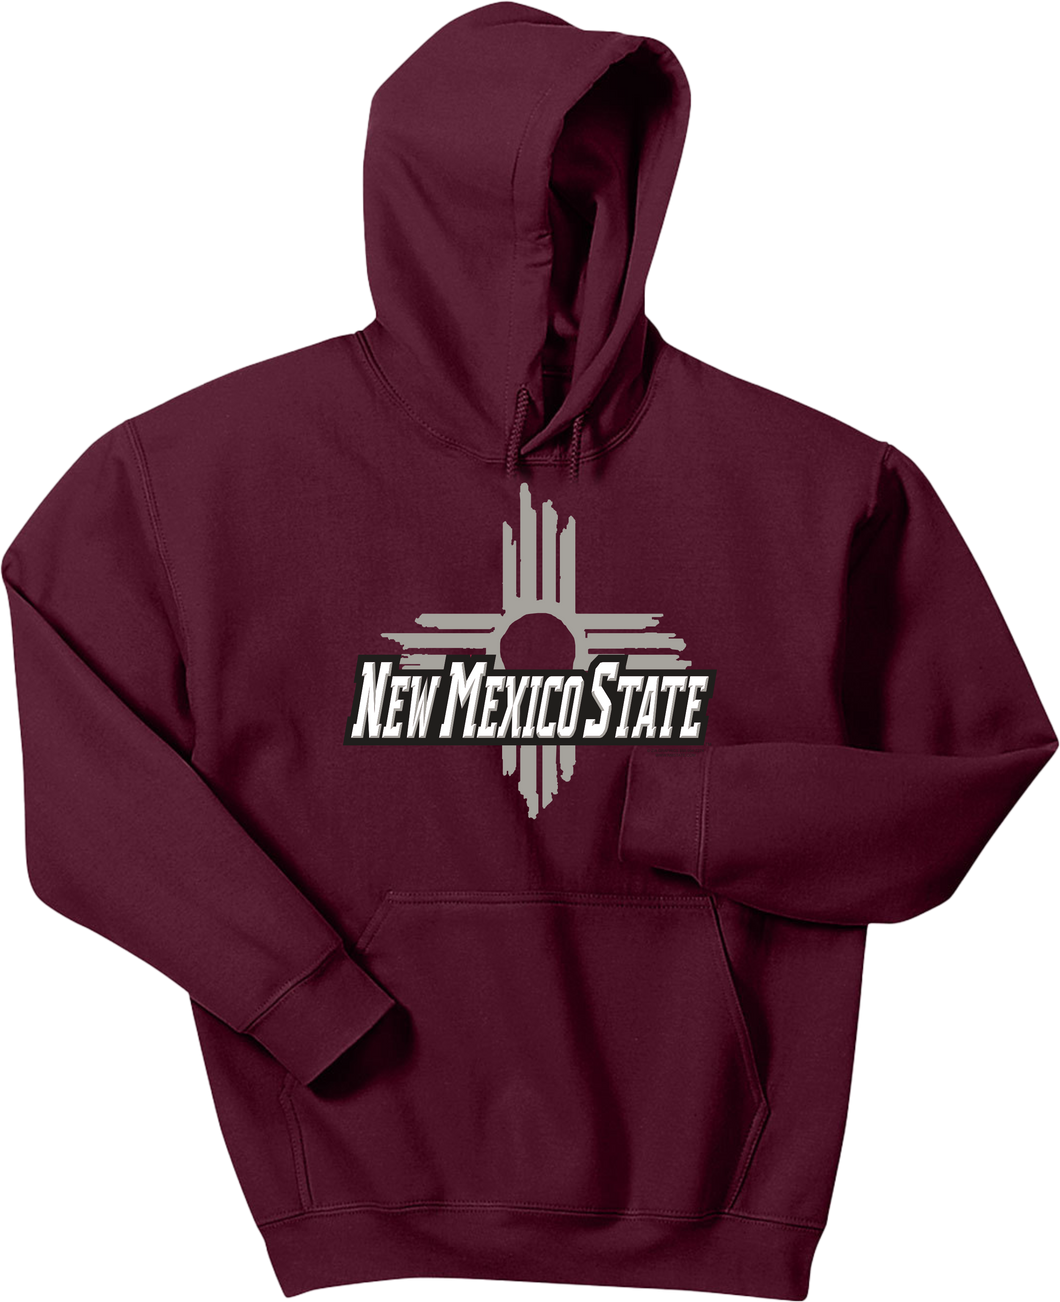 New Mexico State Maroon Zia Hoodie